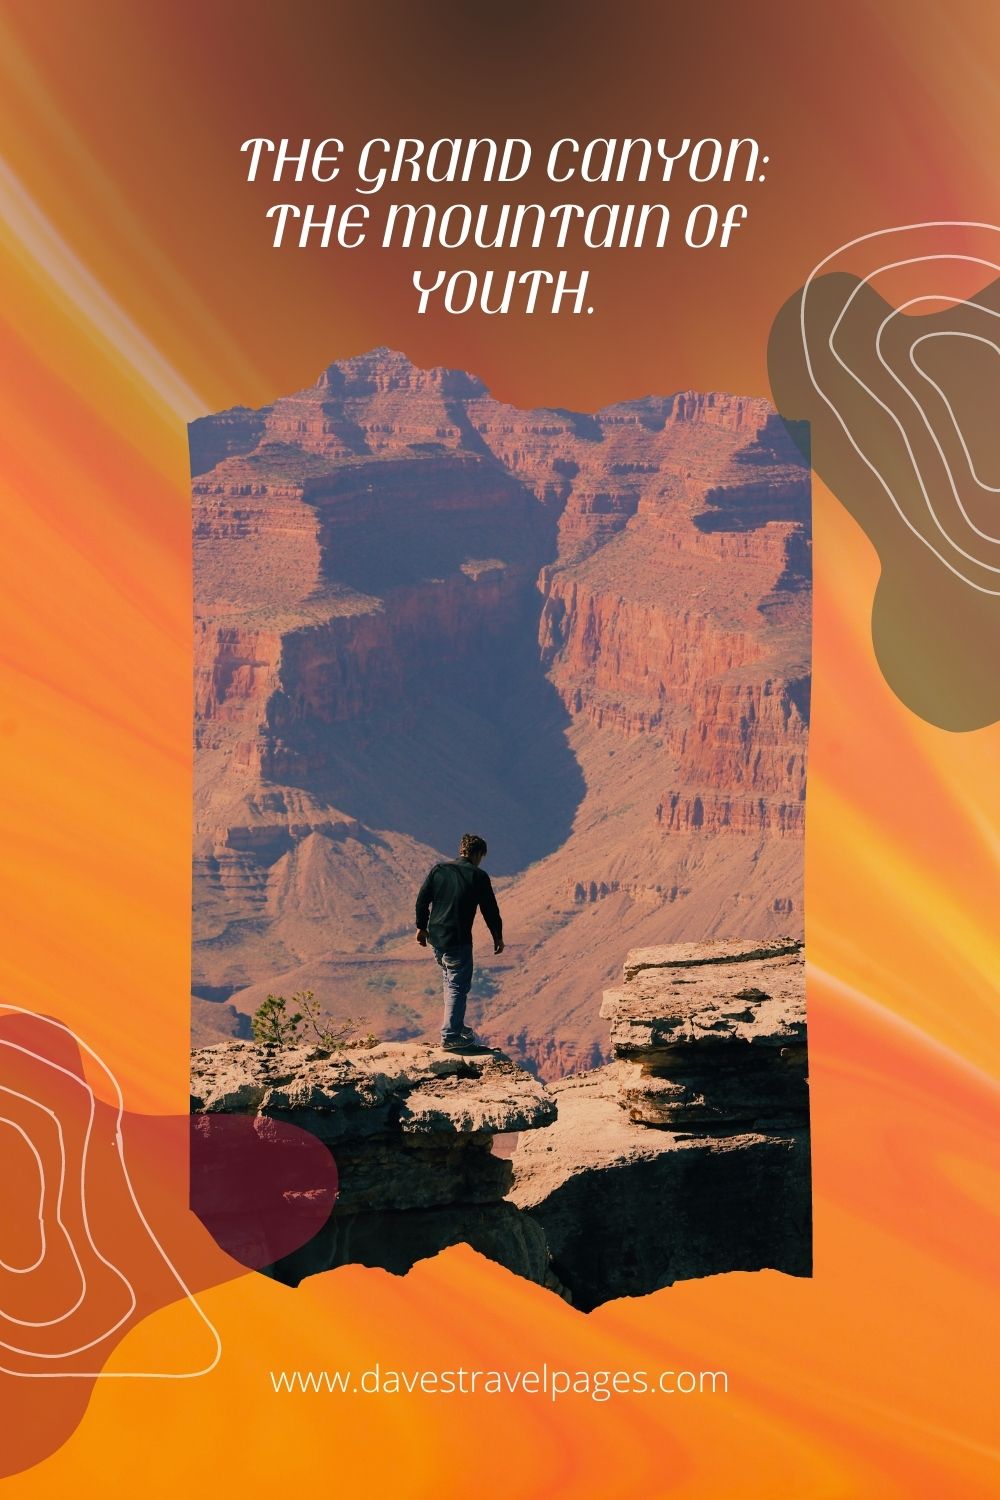 The Grand Canyon: The mountain of youth.